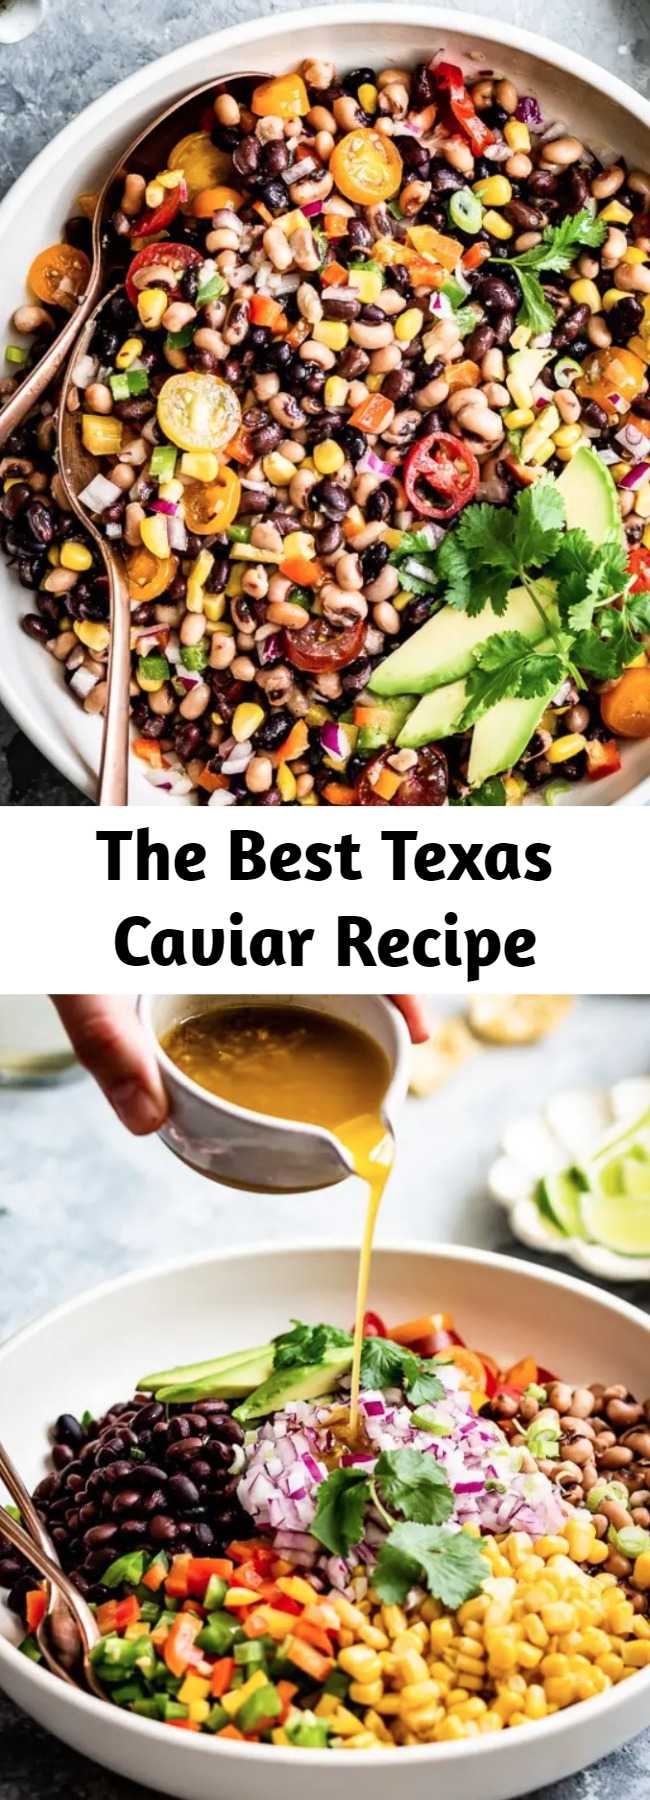 The Best Texas Caviar Recipe - This Texas Caviar (aka Cowboy Caviar)loaded with black-eyed peas, corn, tomatoes, peppers, and tangy lime dressing makes the best salad, dip, or side dish. Ready in 30 minutes and can be made ahead. #texascaviar #salad #healthysaladrecipe #saladrecipe #cowboycaviar #healthyrecipes